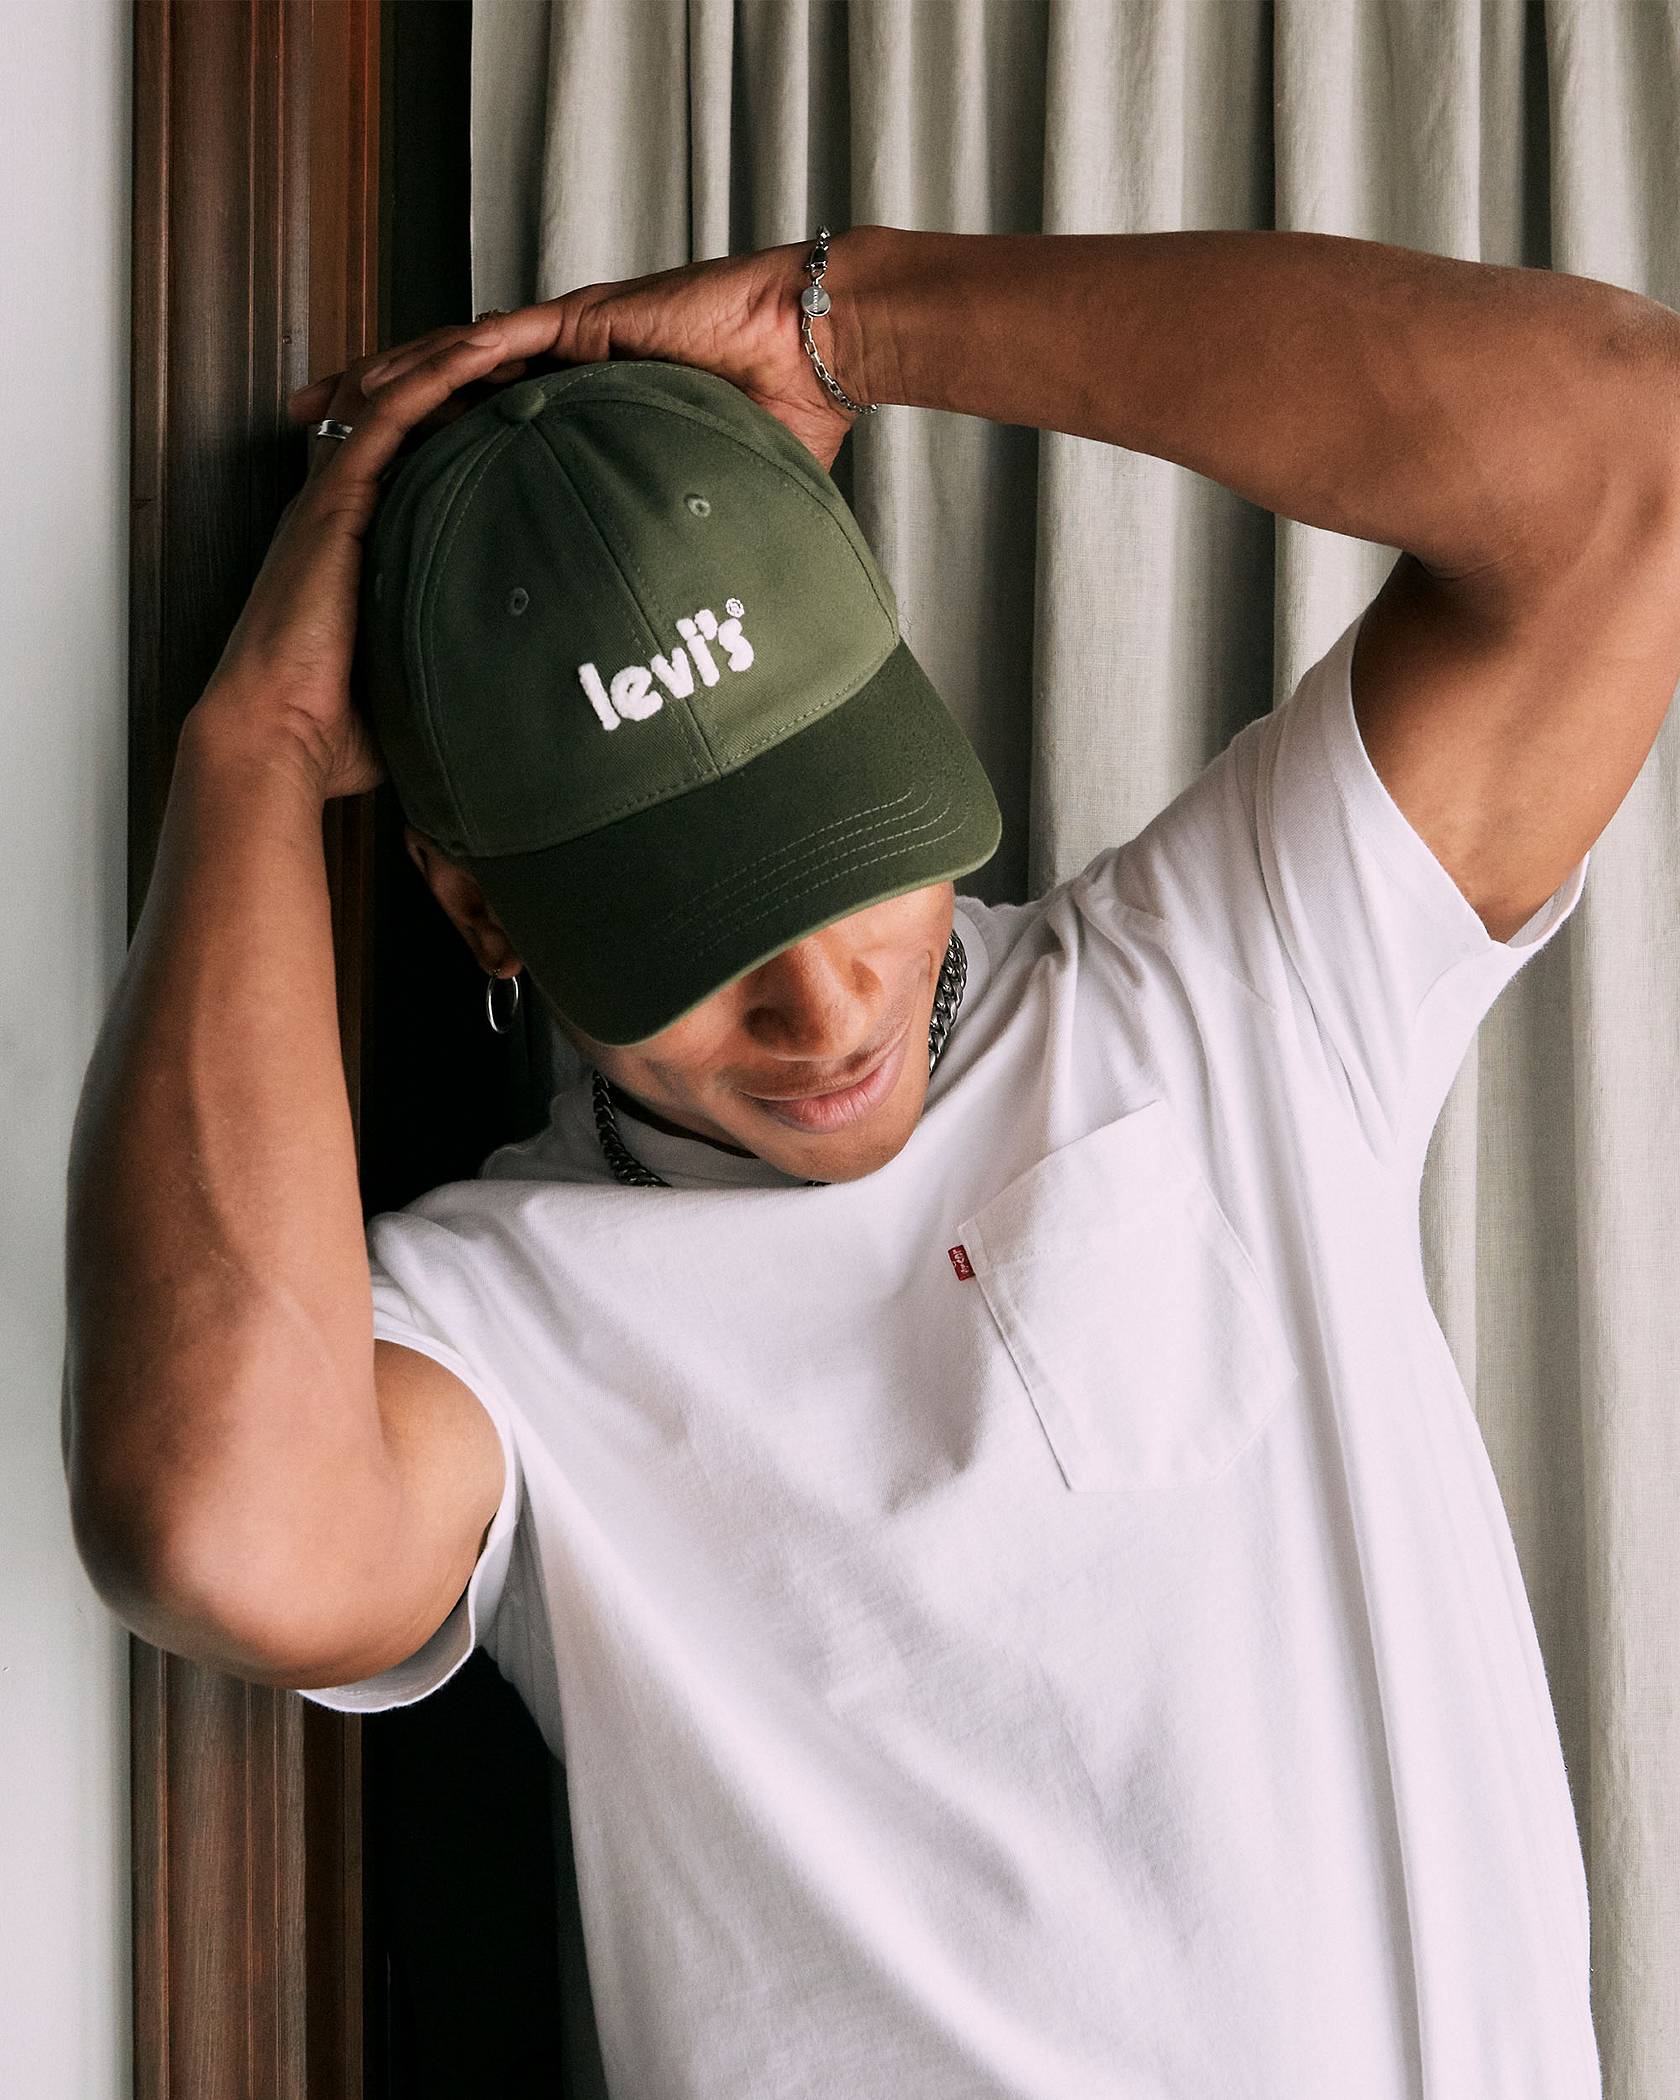 Back to School Shopping featuring Perris Howard in a white tee and forrest green baseball cap